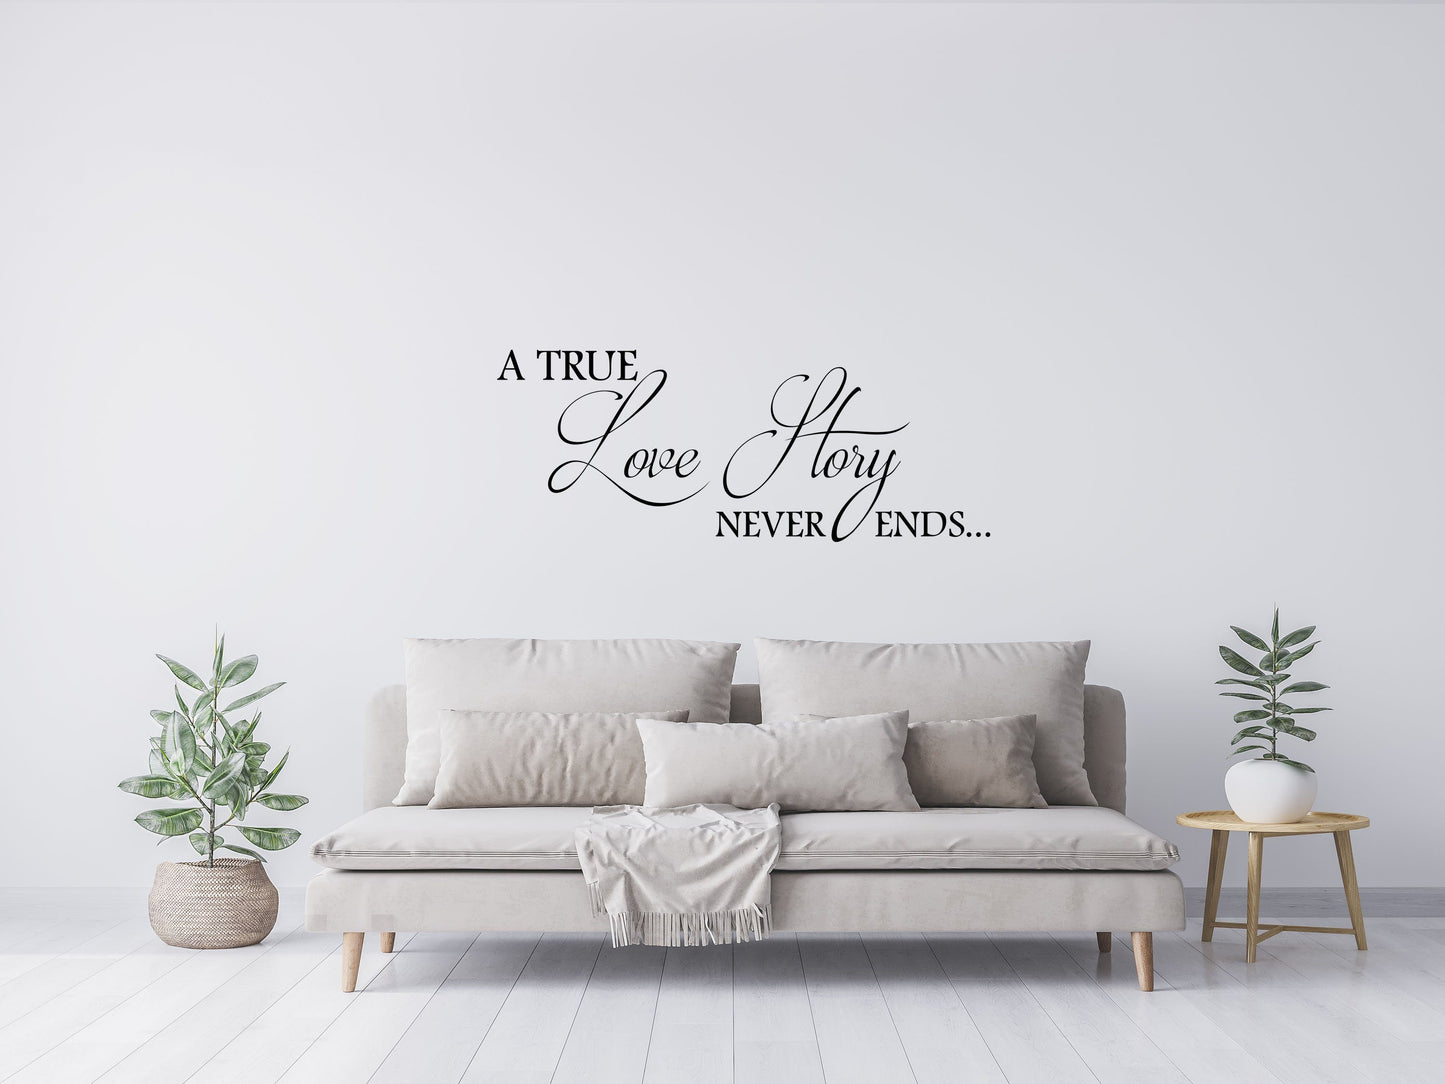 A True Love Story Never Ends Bedroom Marriage Sticker- Inspirational Wall Decals Vinyl Wall Decal Done 